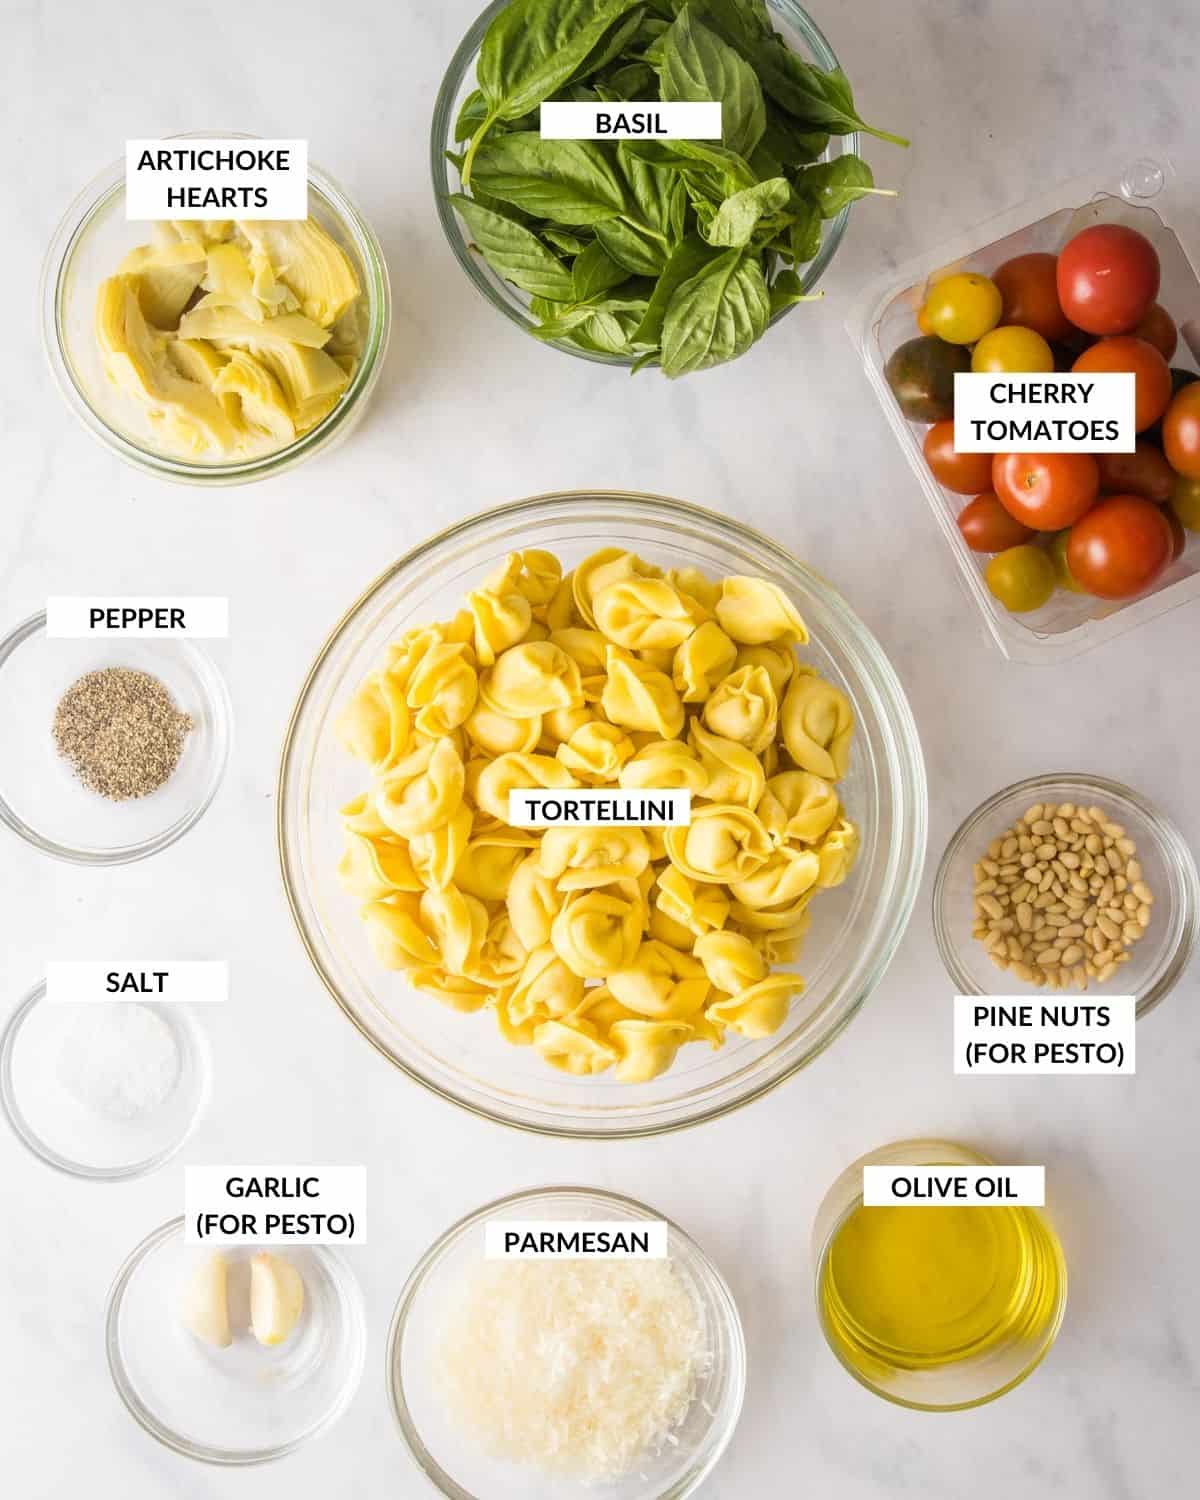 Labeled ingredient list for tortellini pasta salad - check recipe card for details.